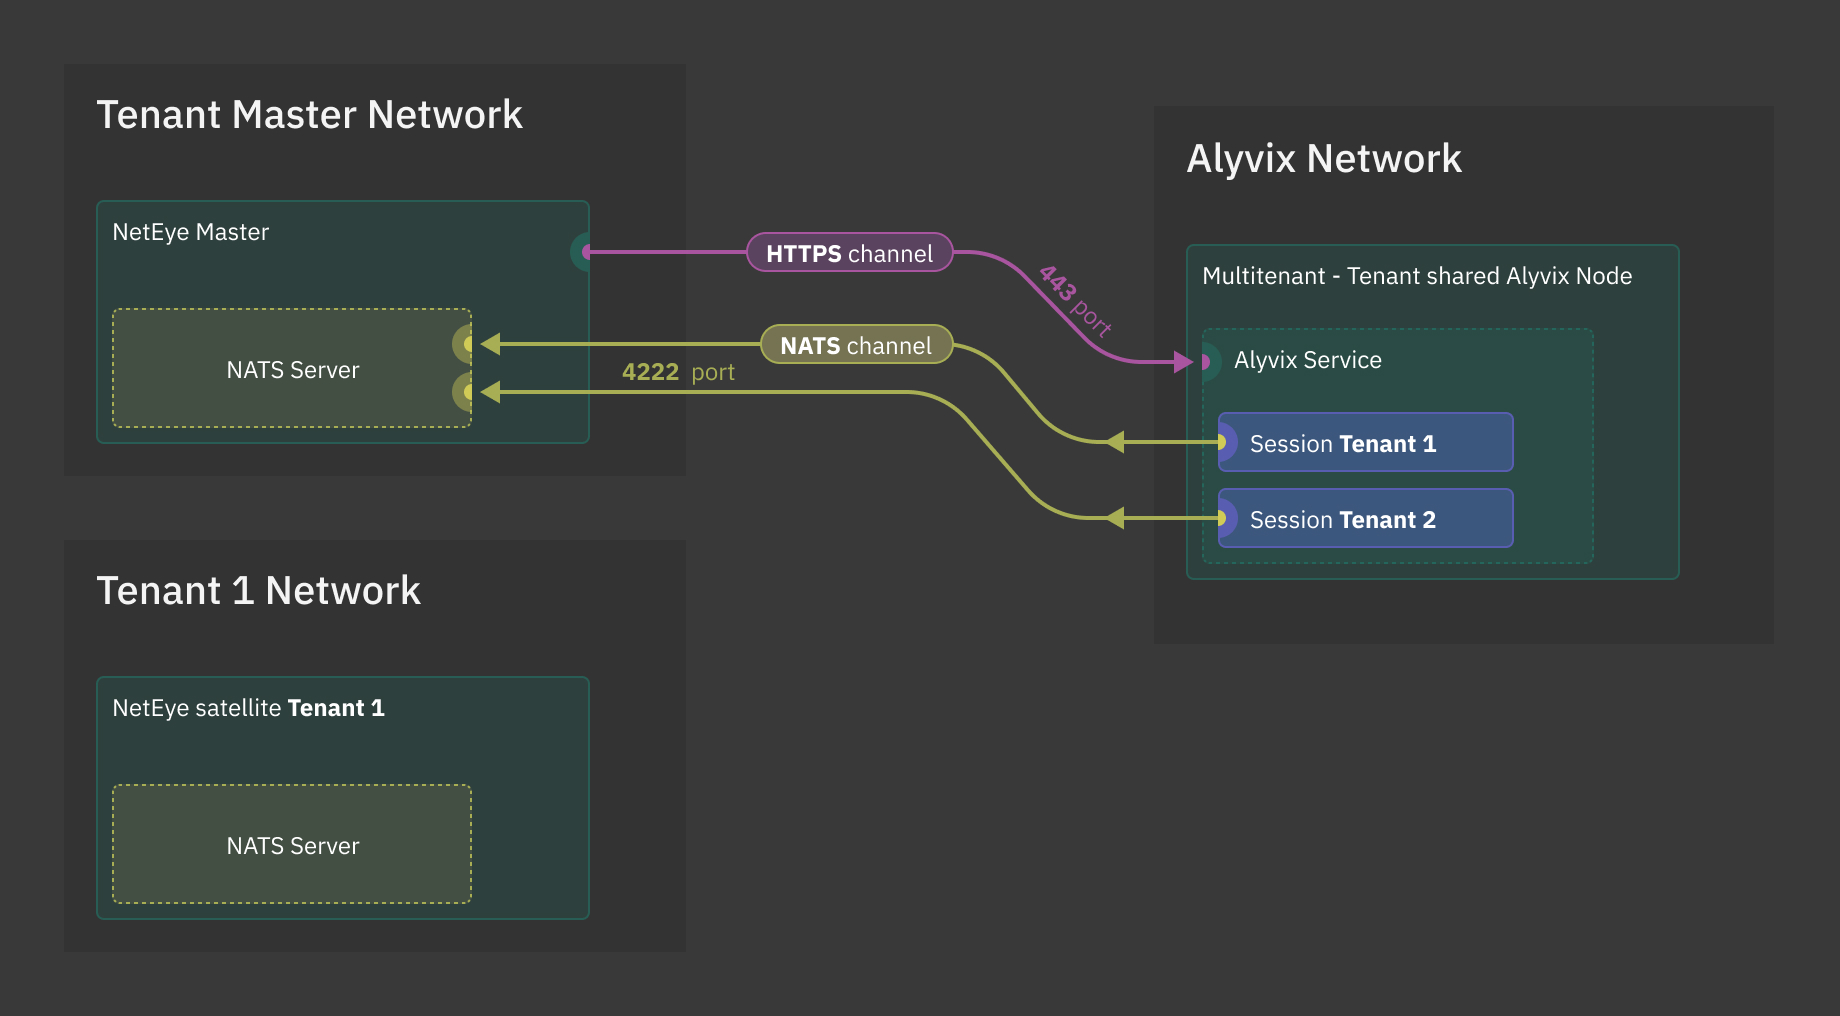 Direct communication between the Alyvix node and the |ne| Master